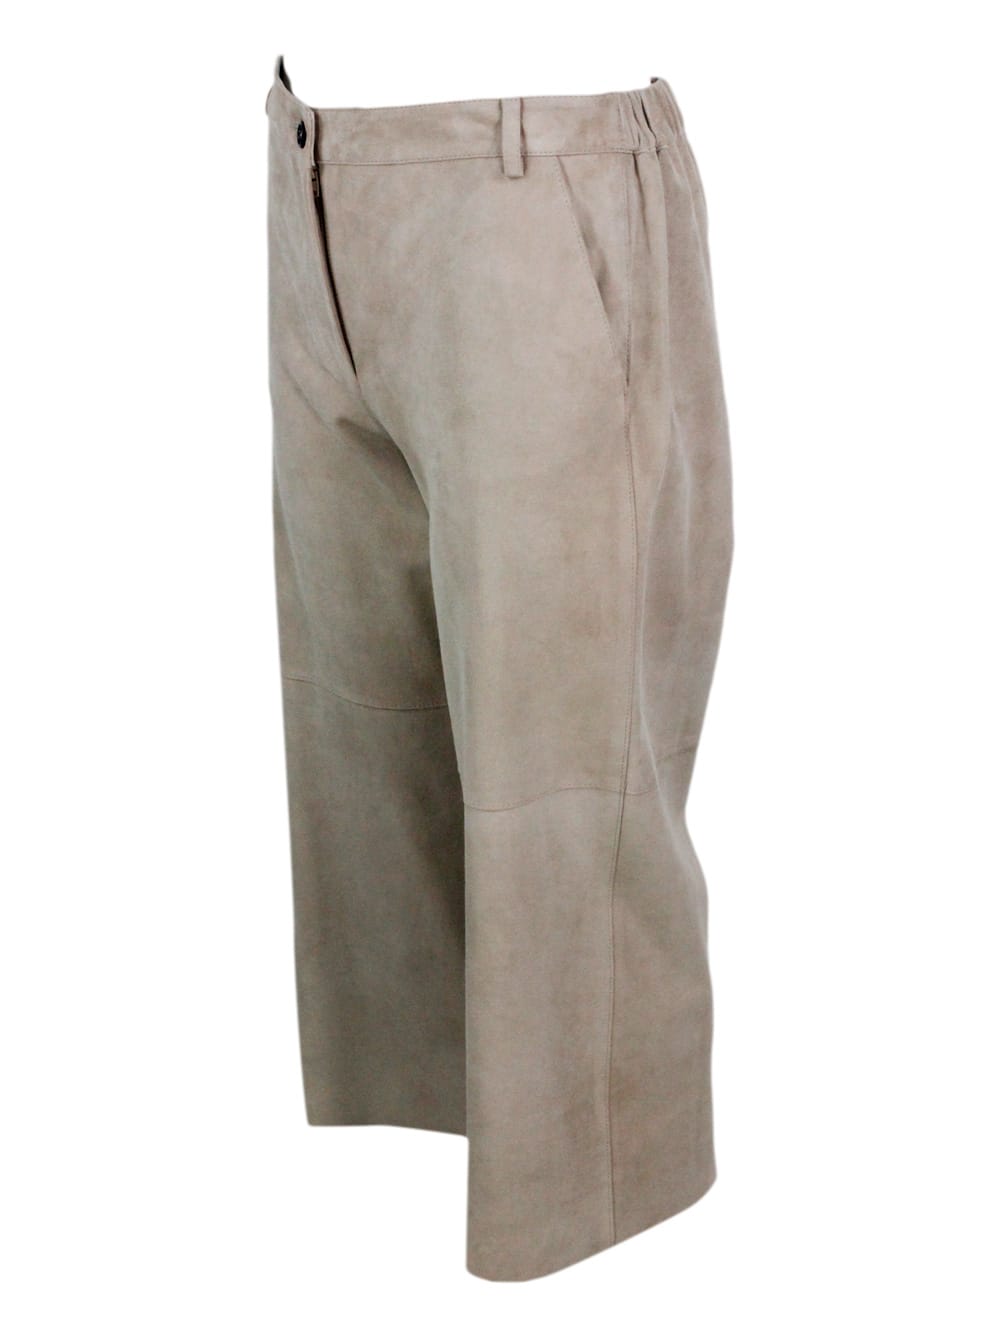 Shop Antonelli Trousers Made Of Soft Suede, With A Soft Fit And Zip And Button Closure With Elastic Waist On The Ba In Beige